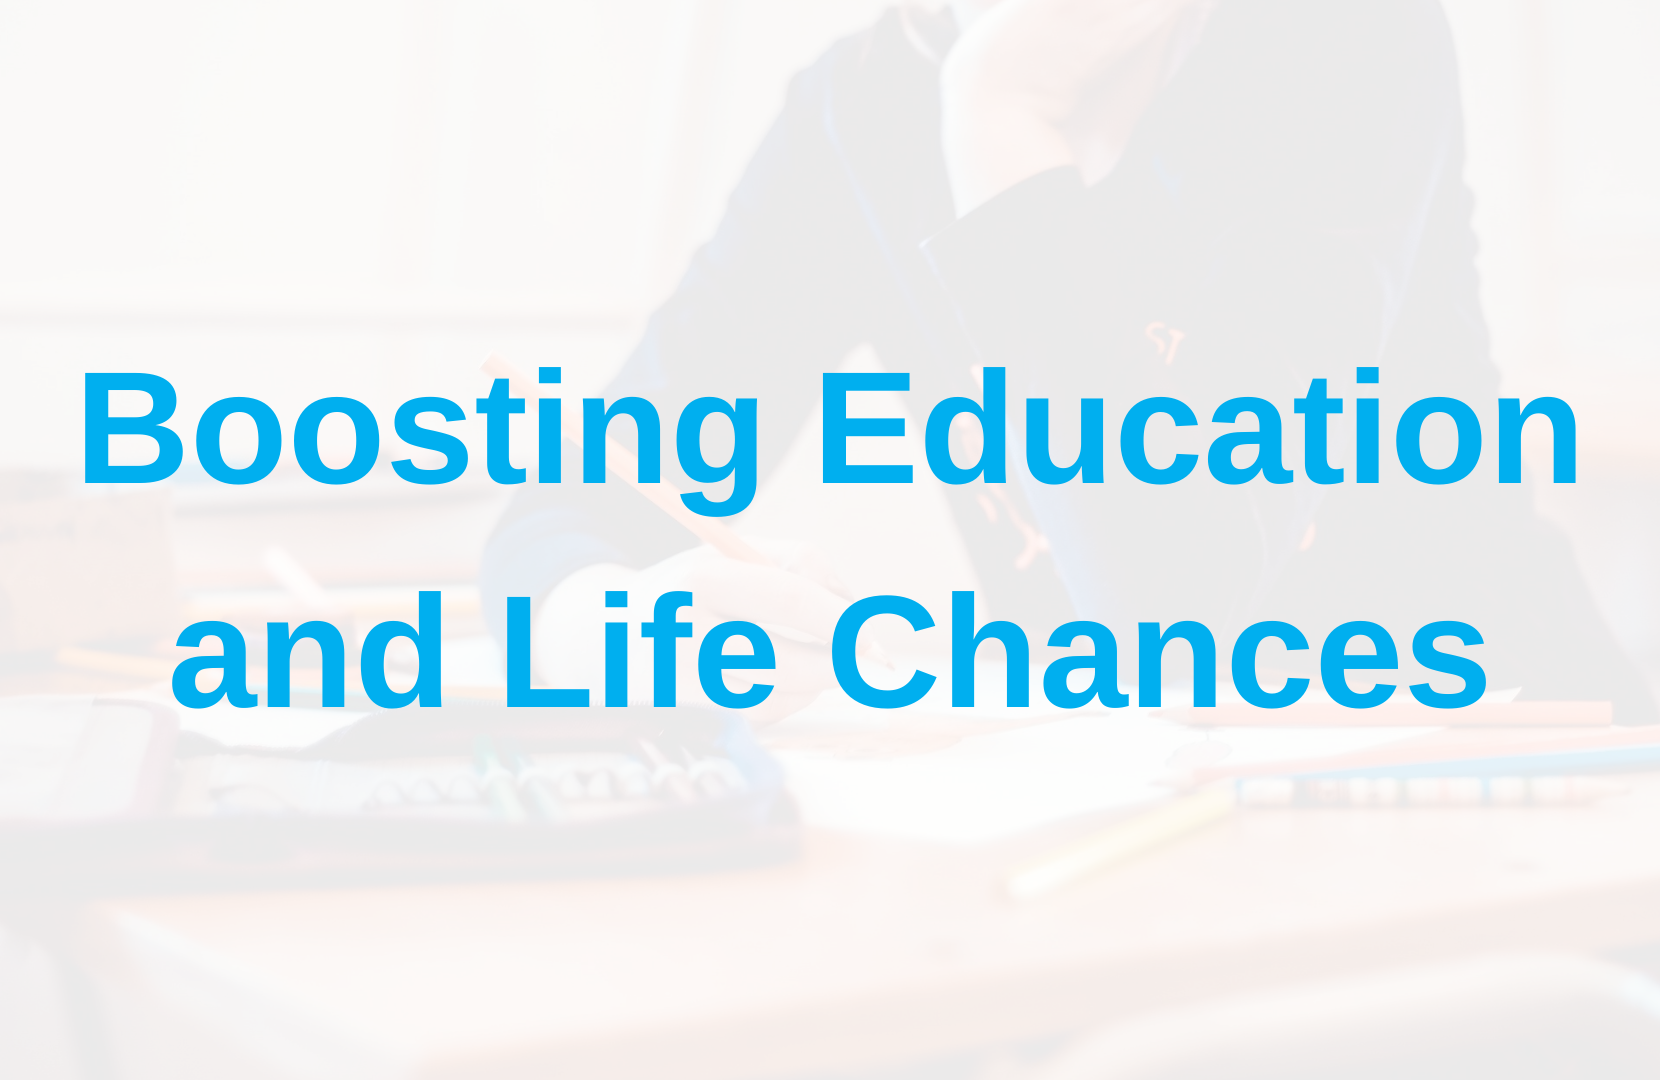 Boosting Education and Life Chances